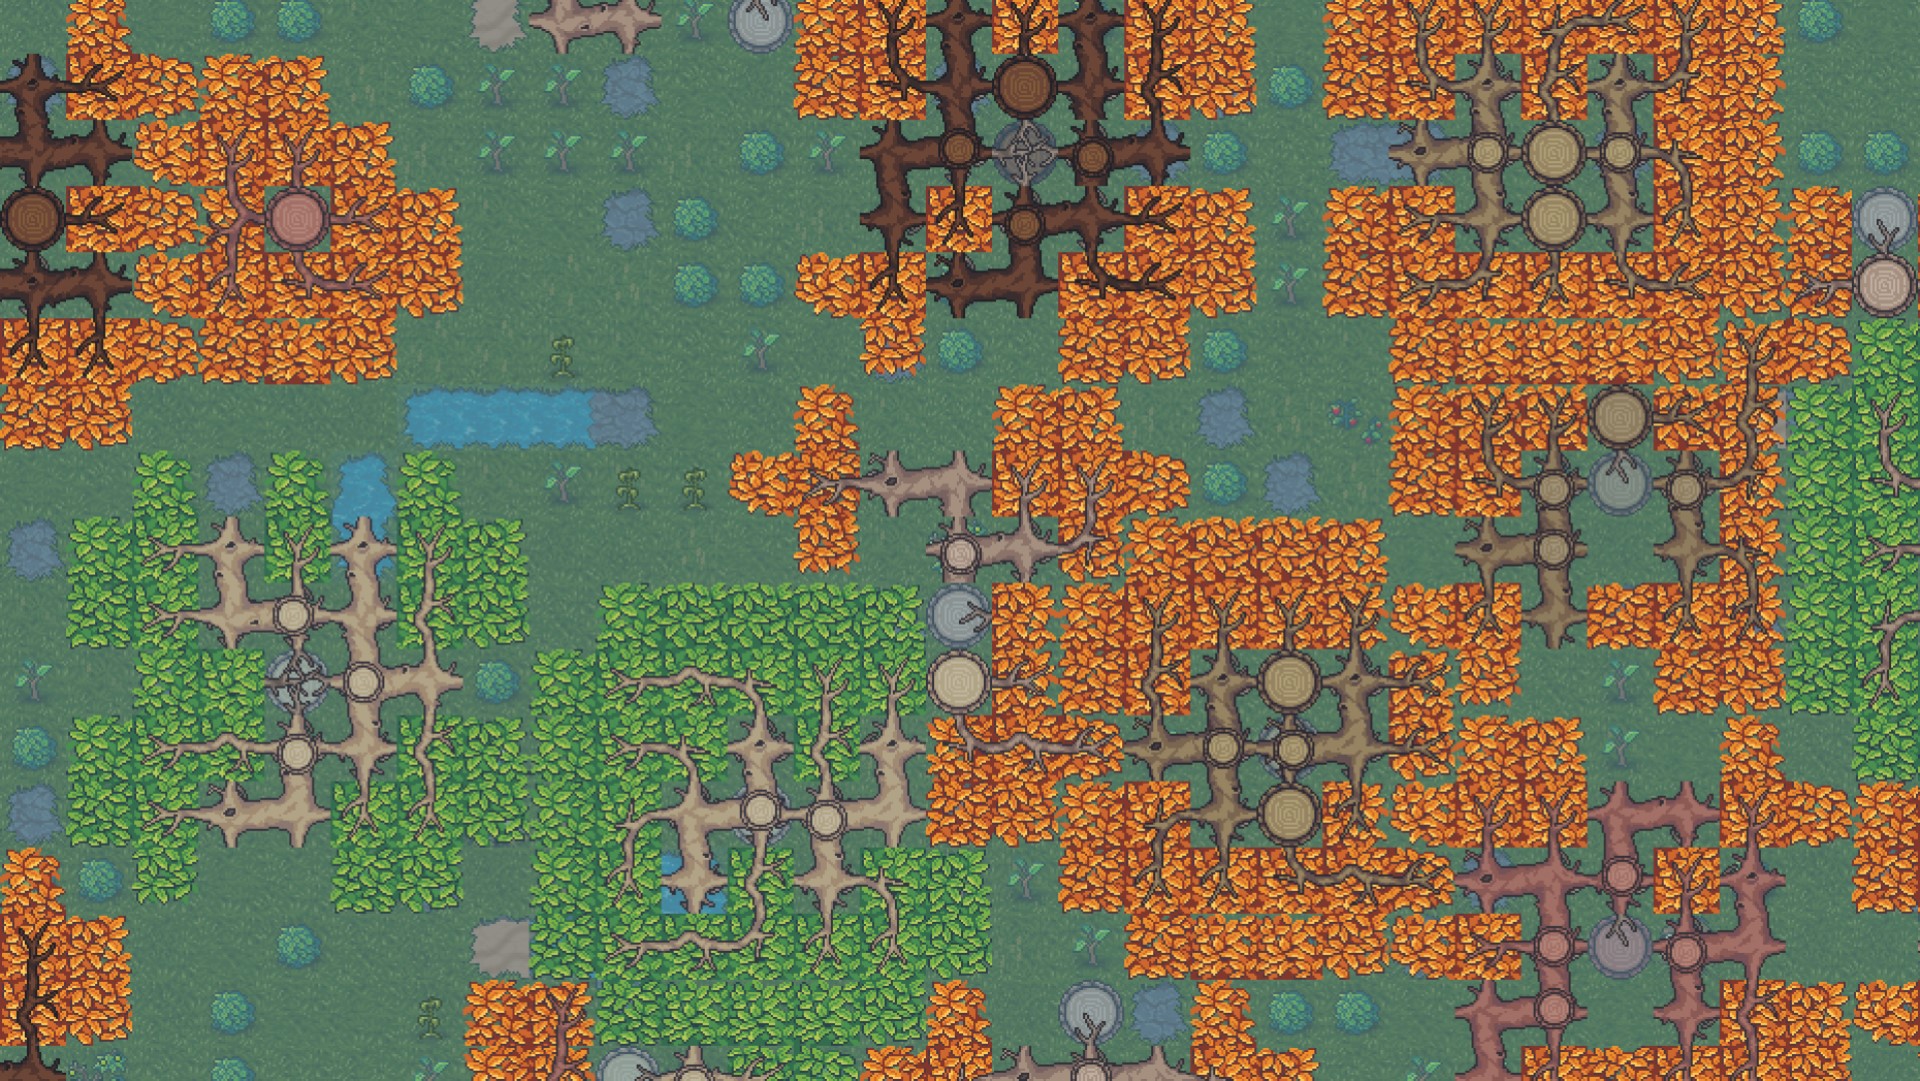 Dwarf Fortress on Steam will have lush, colourful forests